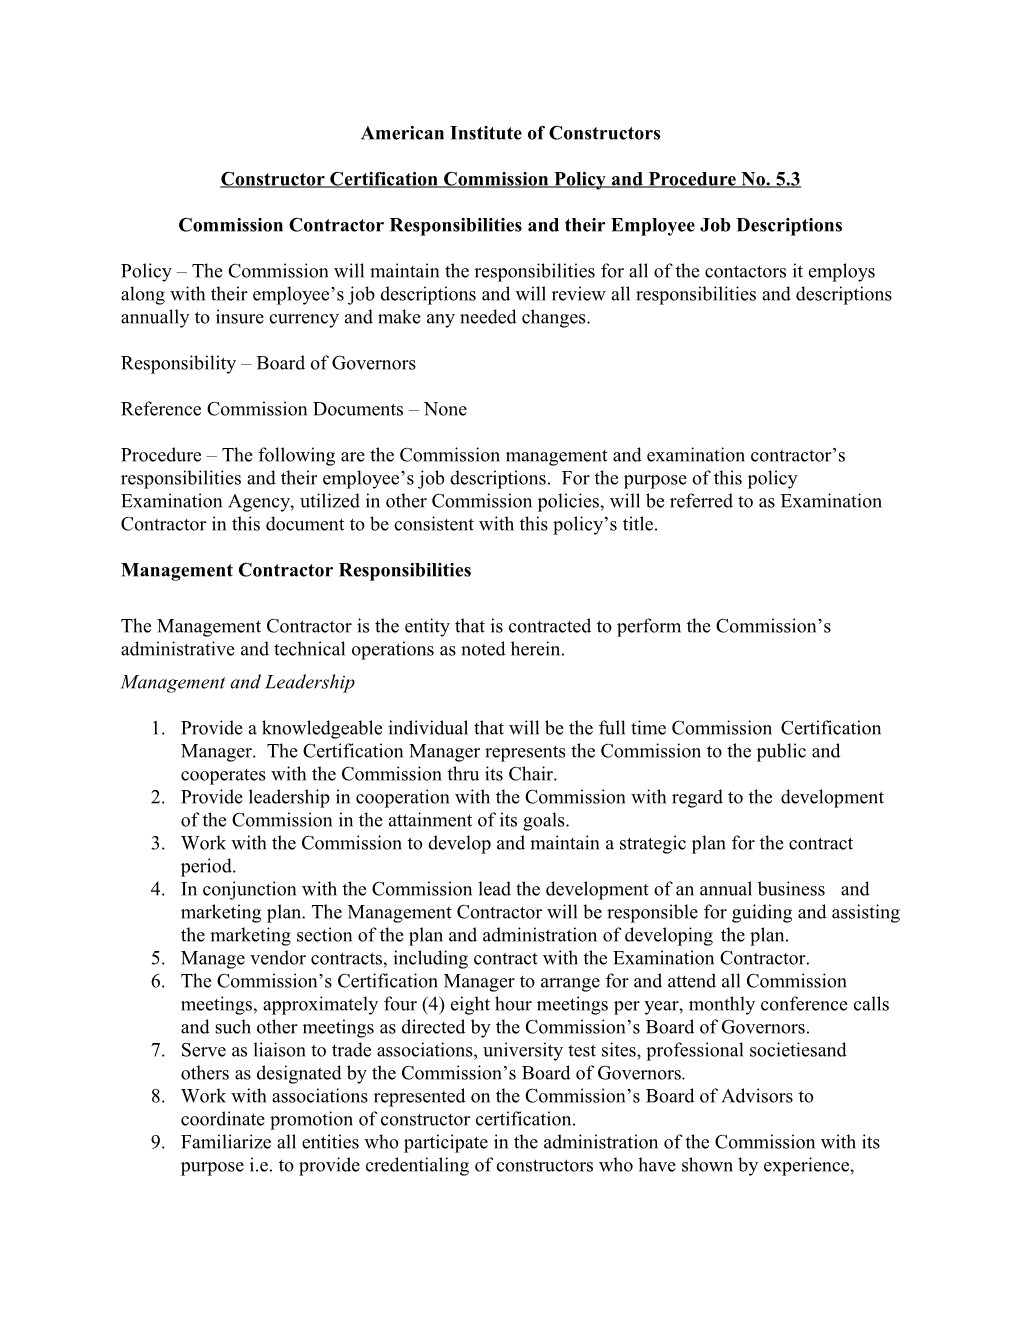 Constructor Certification Commission Policy and Procedure No. 5.3